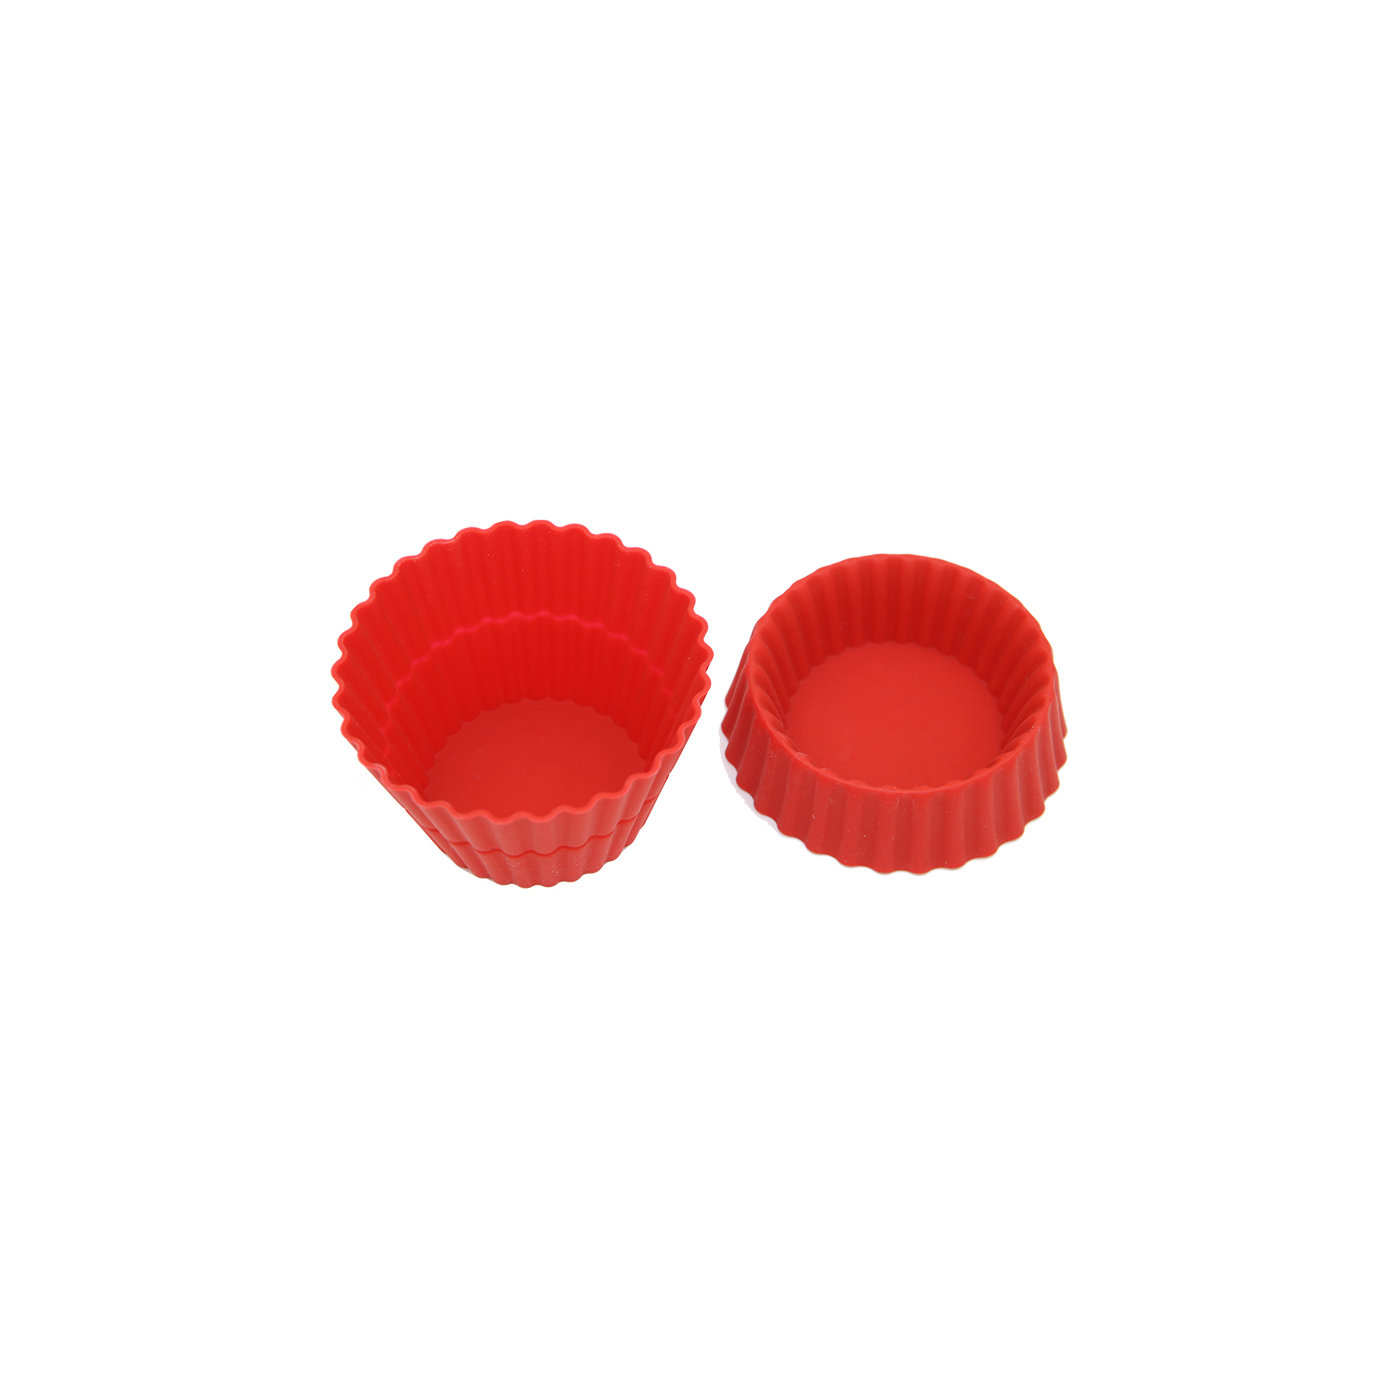 BM087 Foldable Cup Cake Mould | Silicone Cake Mould